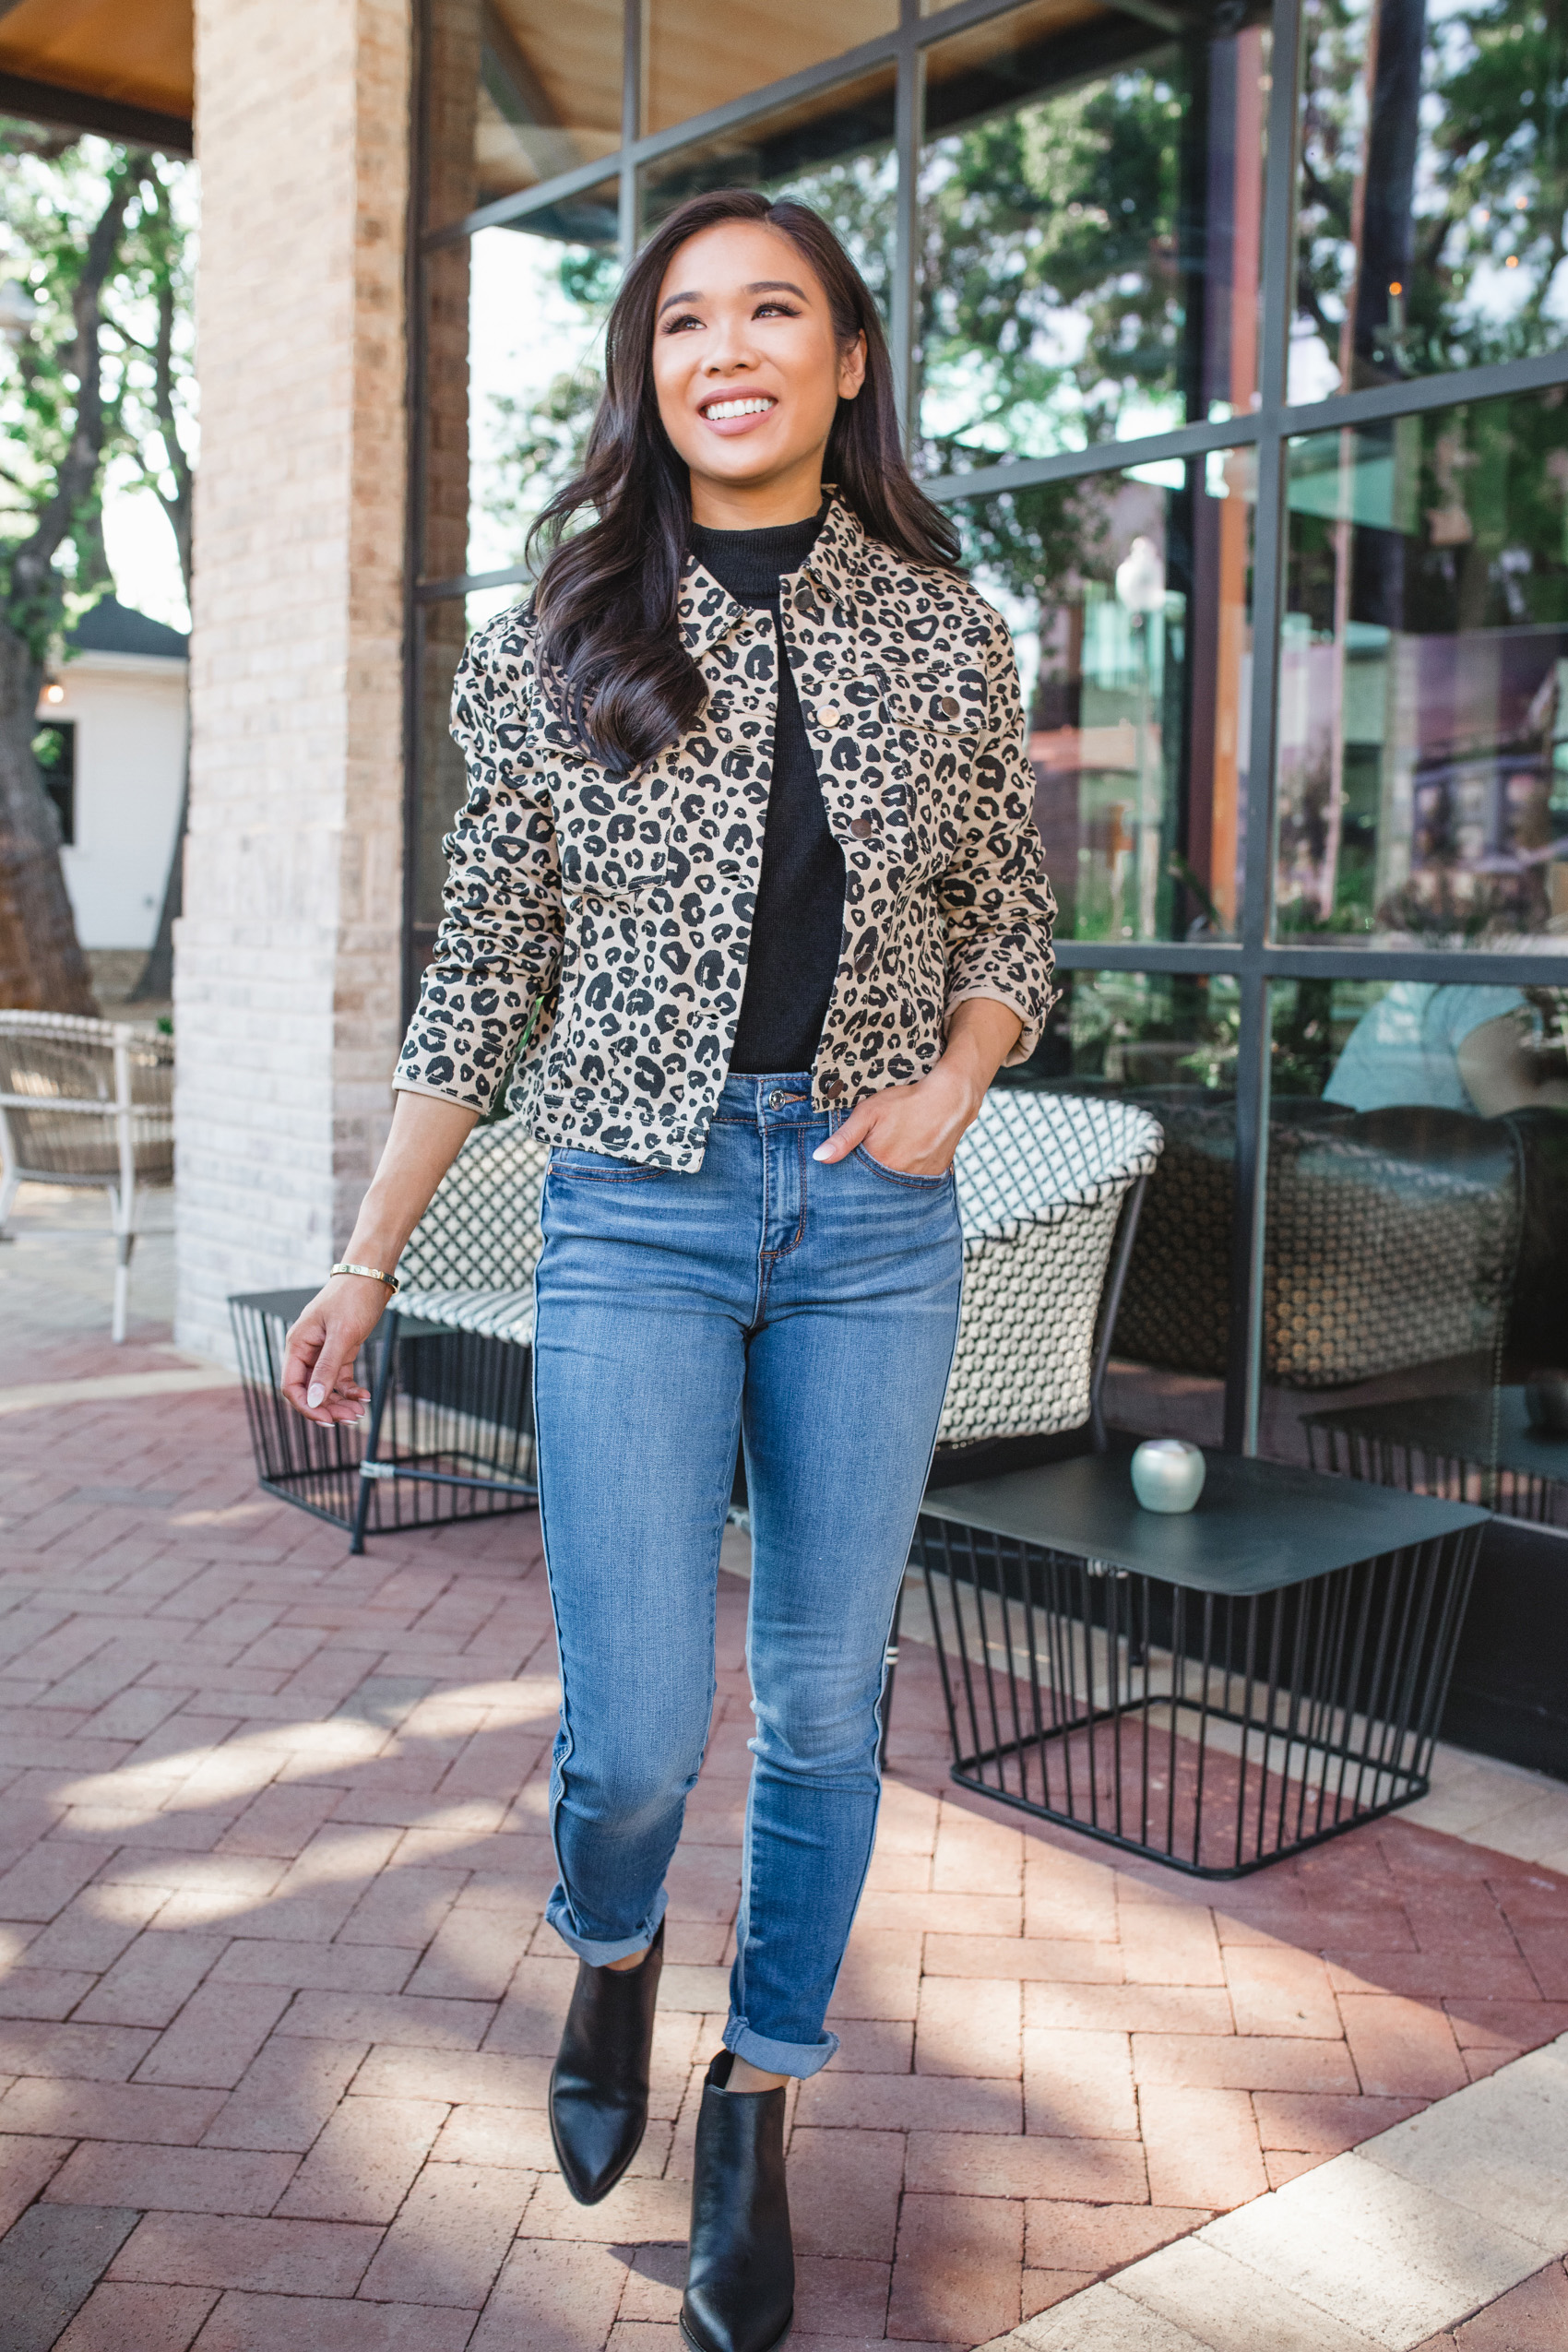 Leopard jacket, black sweater, blue jeans and black booties all affordable fall fashion